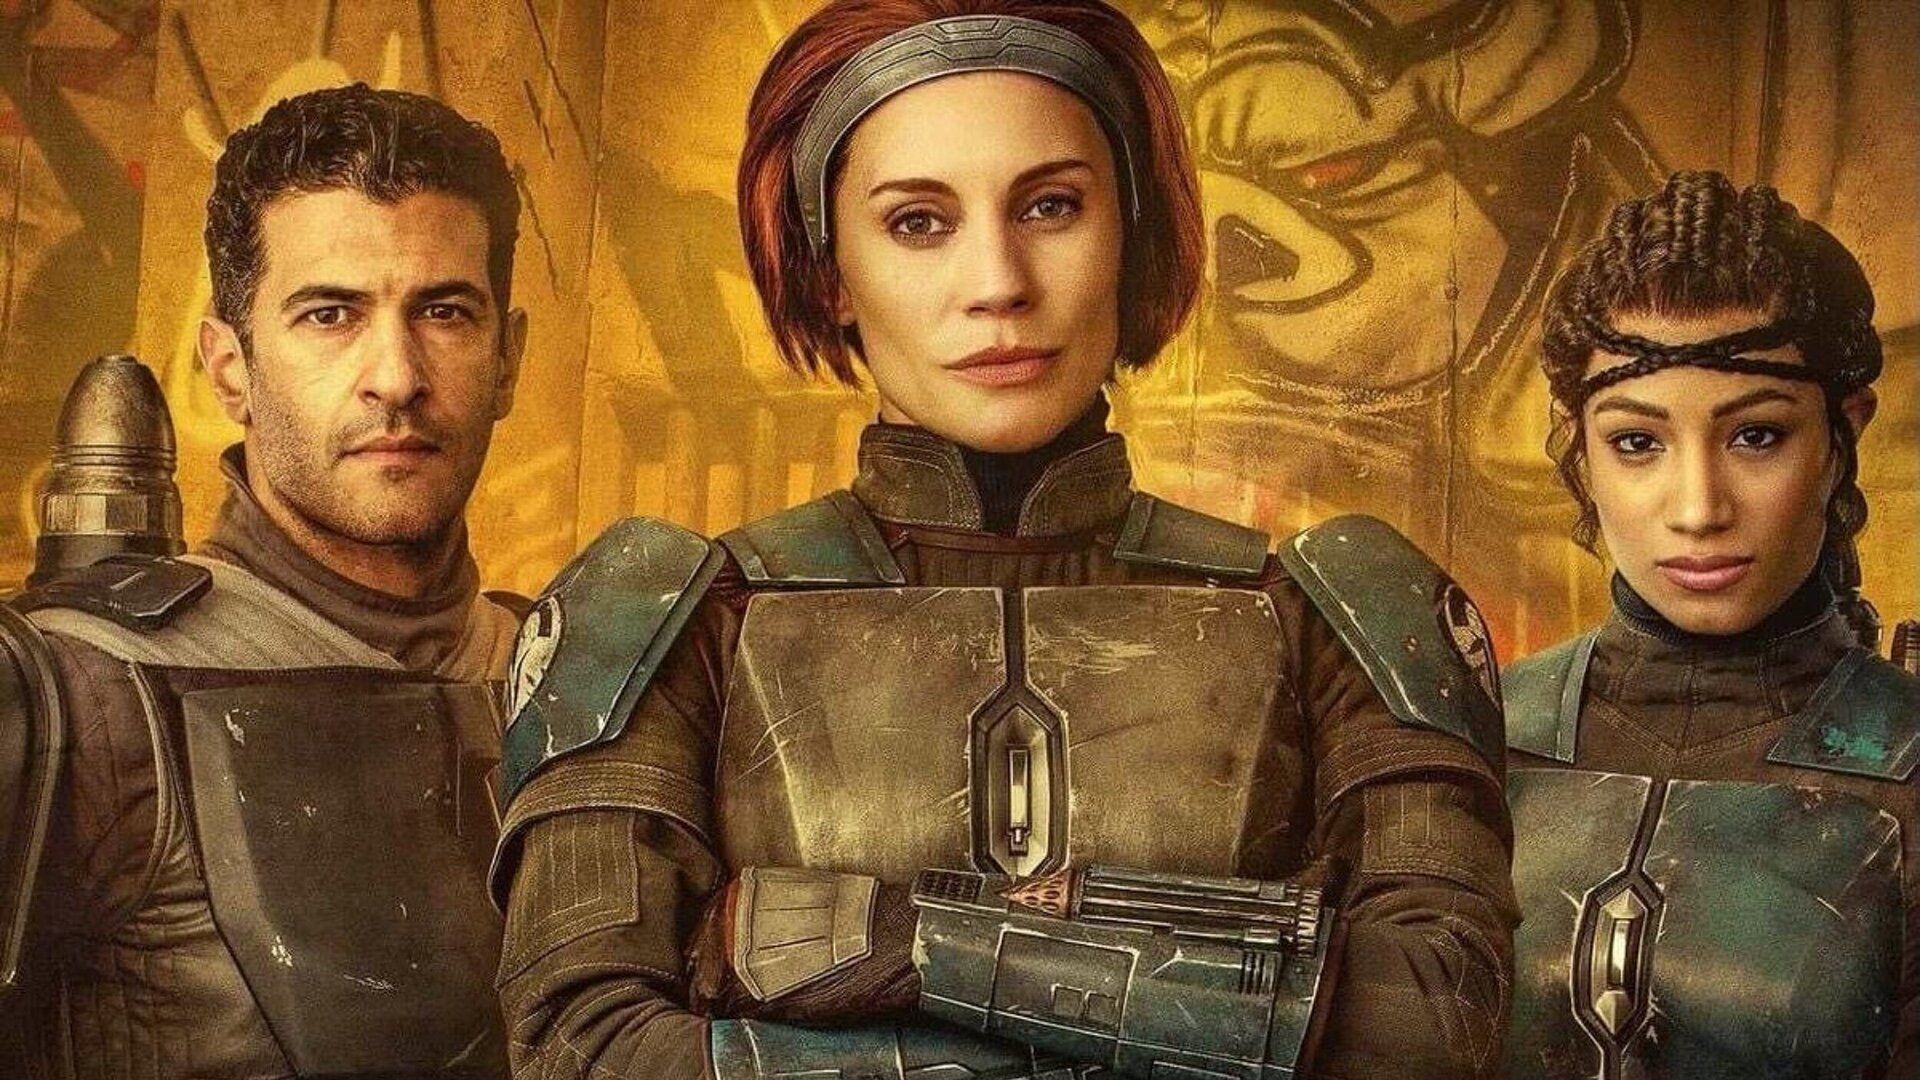 New Poster For THE MANDALORIAN Features Bo Katan And The Nite Owls